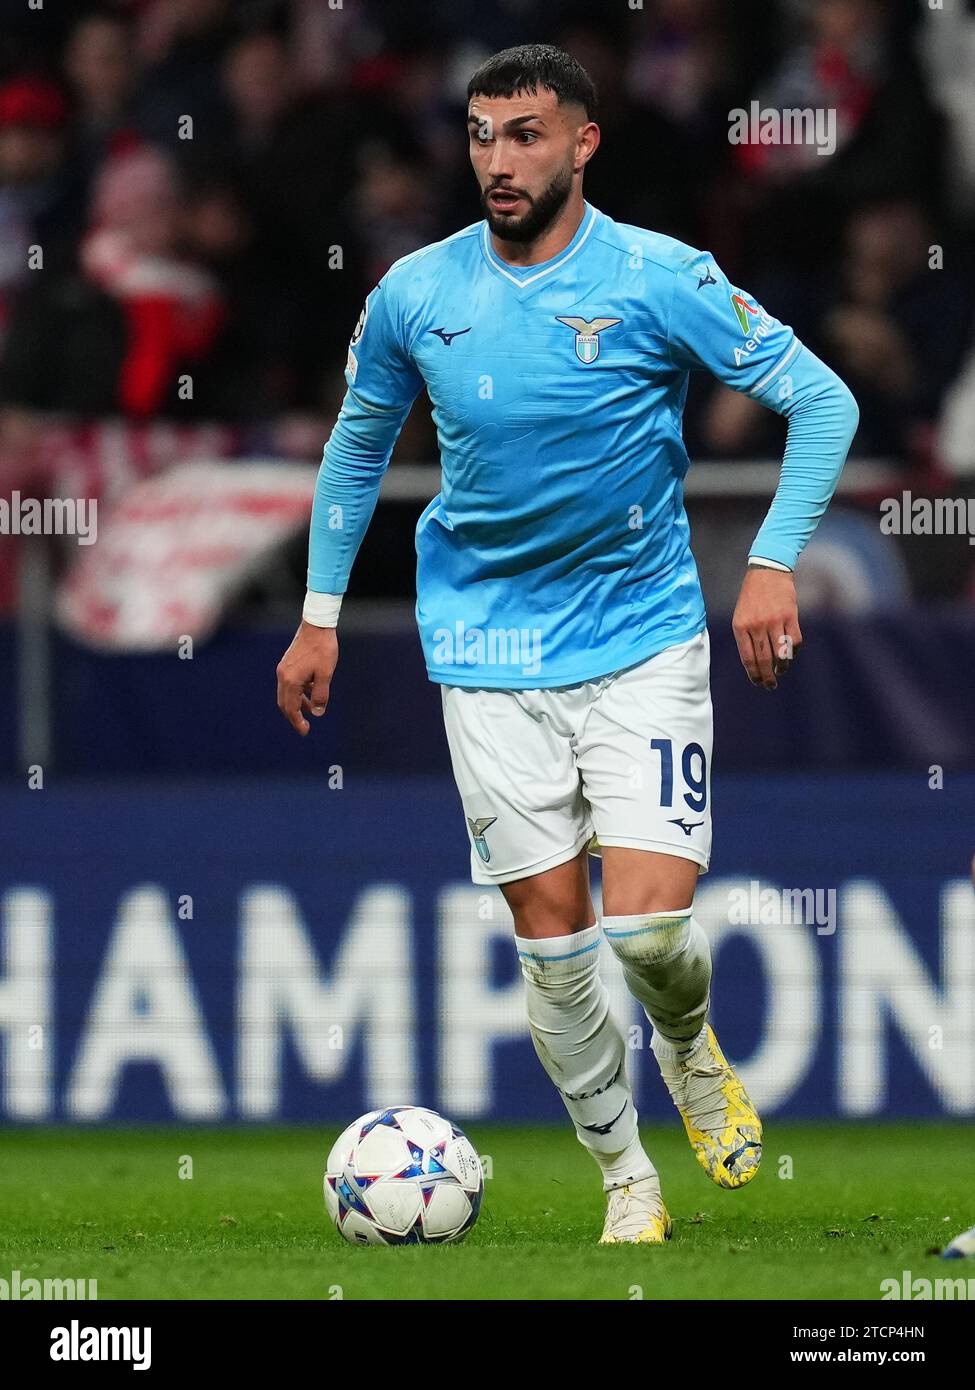 Madrid, Spain. 13th Dec, 2023. Valentin Tati Castellanos of SS Lazio during the UEFA Champions League match, Group E, between Atletico de Madrid and SS Lazio played at Civitas Mertropolitano Stadium on December 13, 2023 in Madrid, Spain. (Photo by Bagu Blanco/PRESSINPHOTO) Credit: PRESSINPHOTO SPORTS AGENCY/Alamy Live News Stock Photo